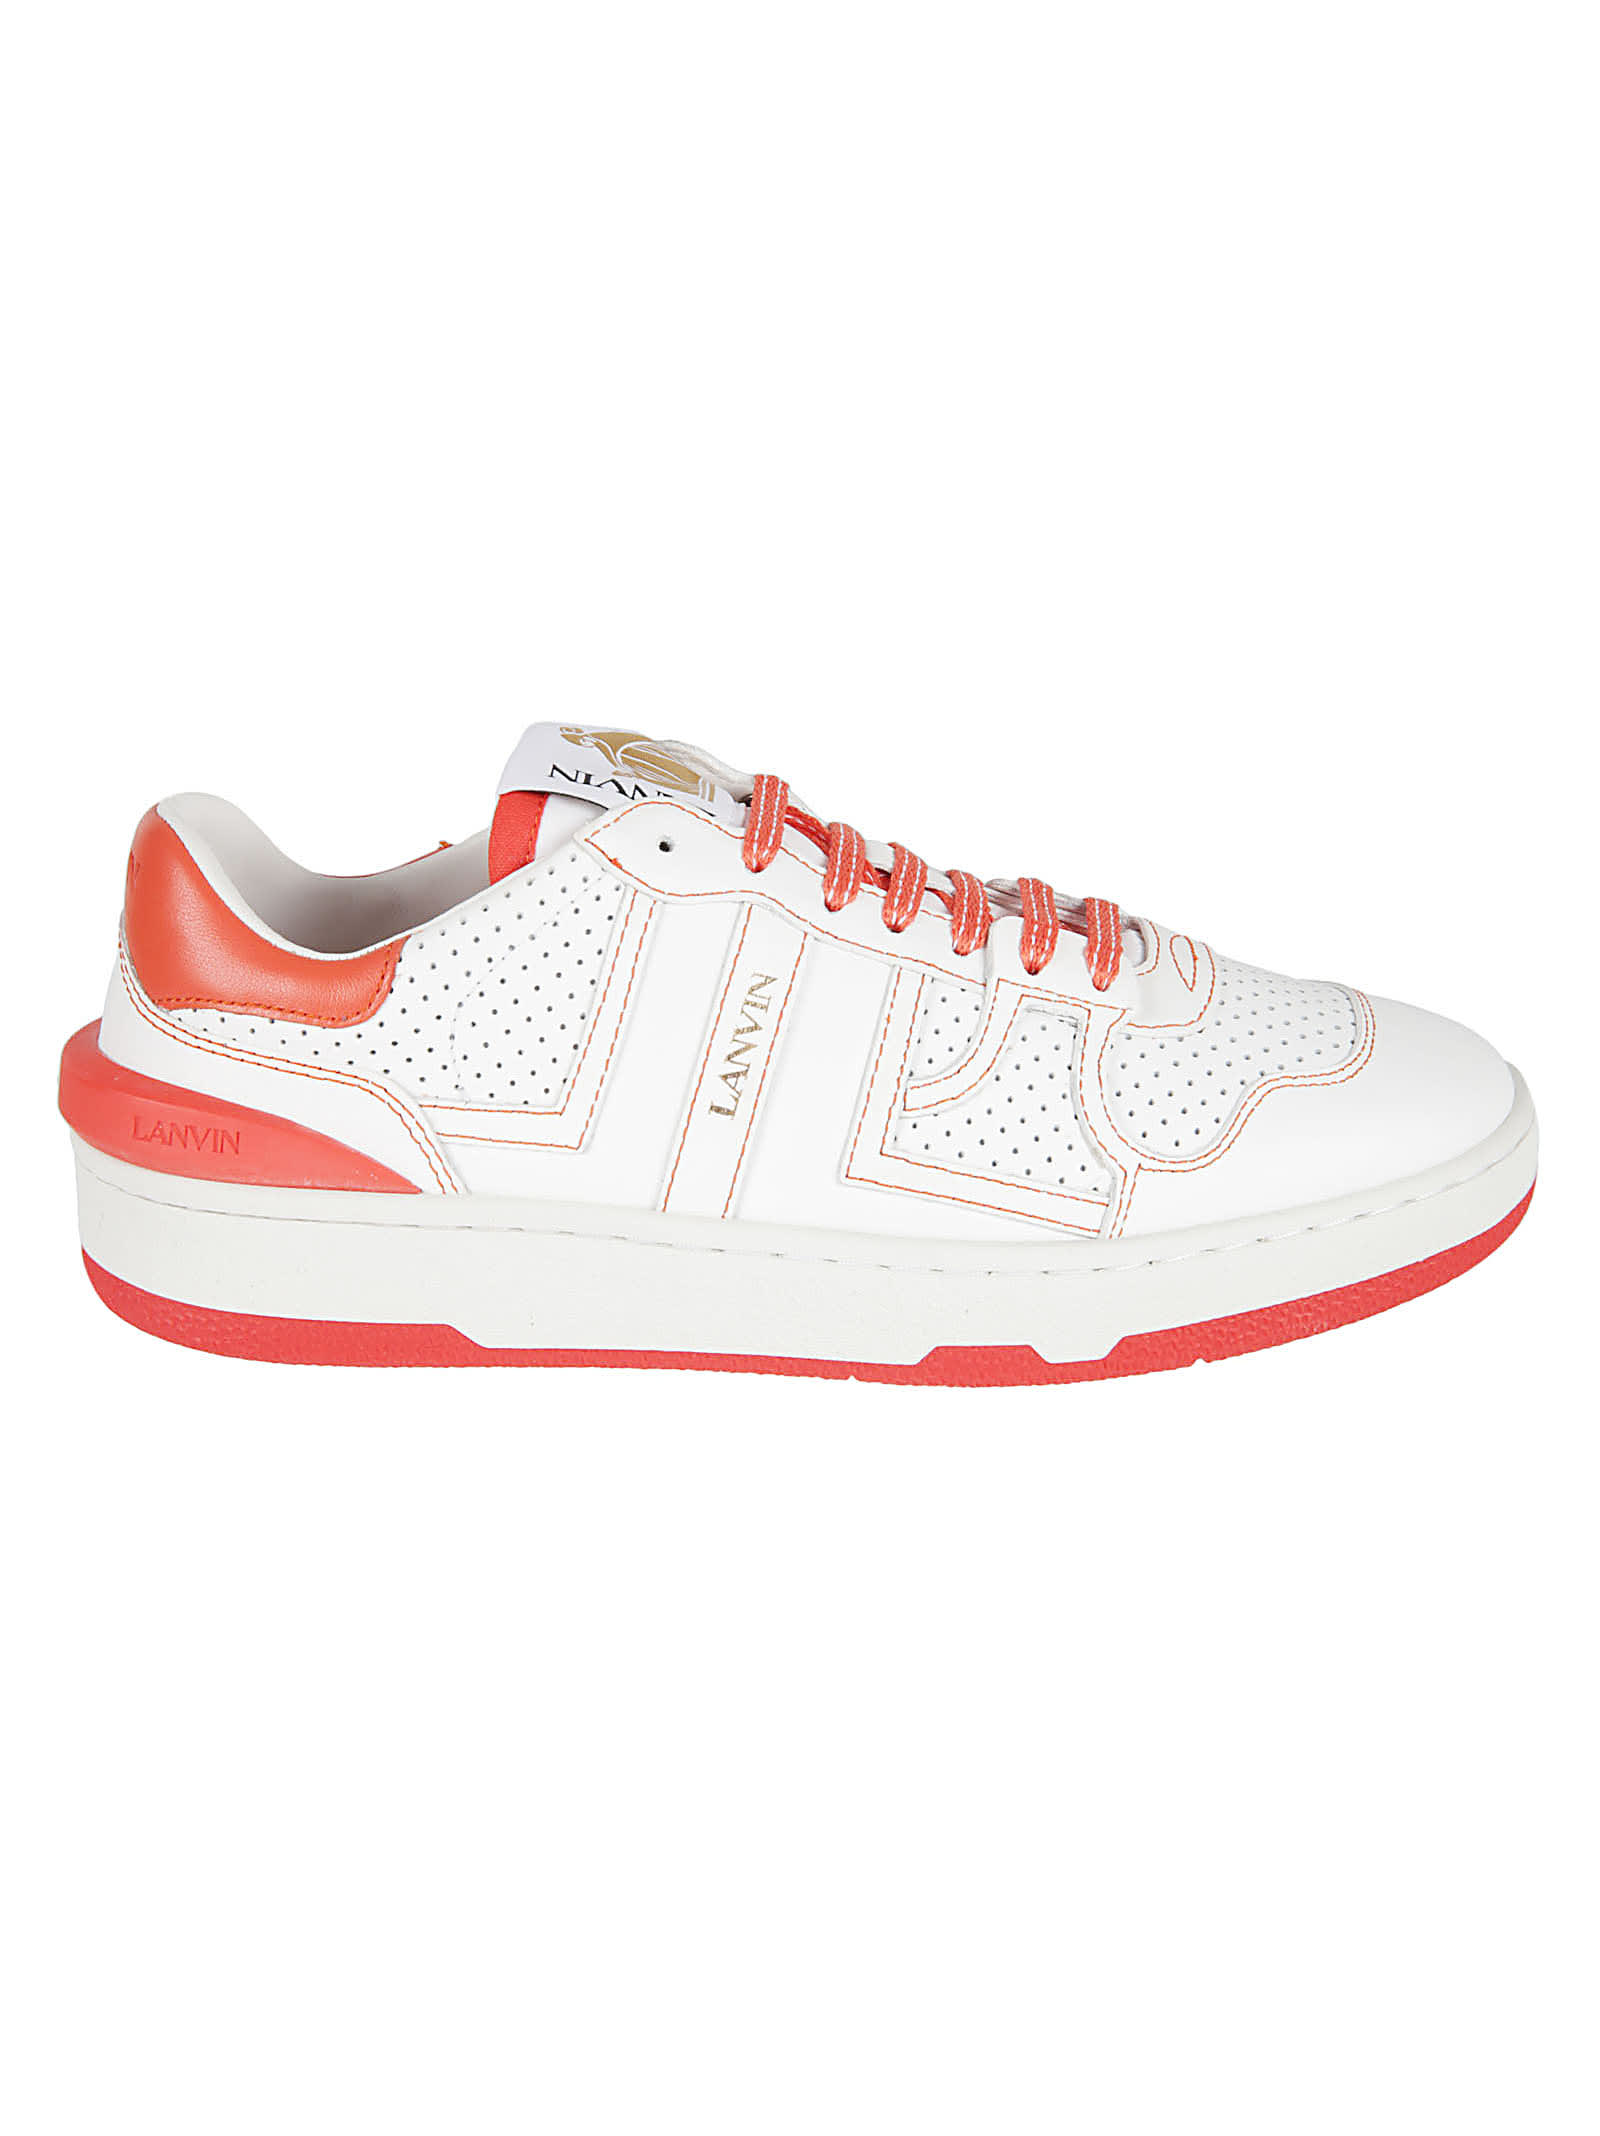 Lanvin Side Logo Perforated Sneakers